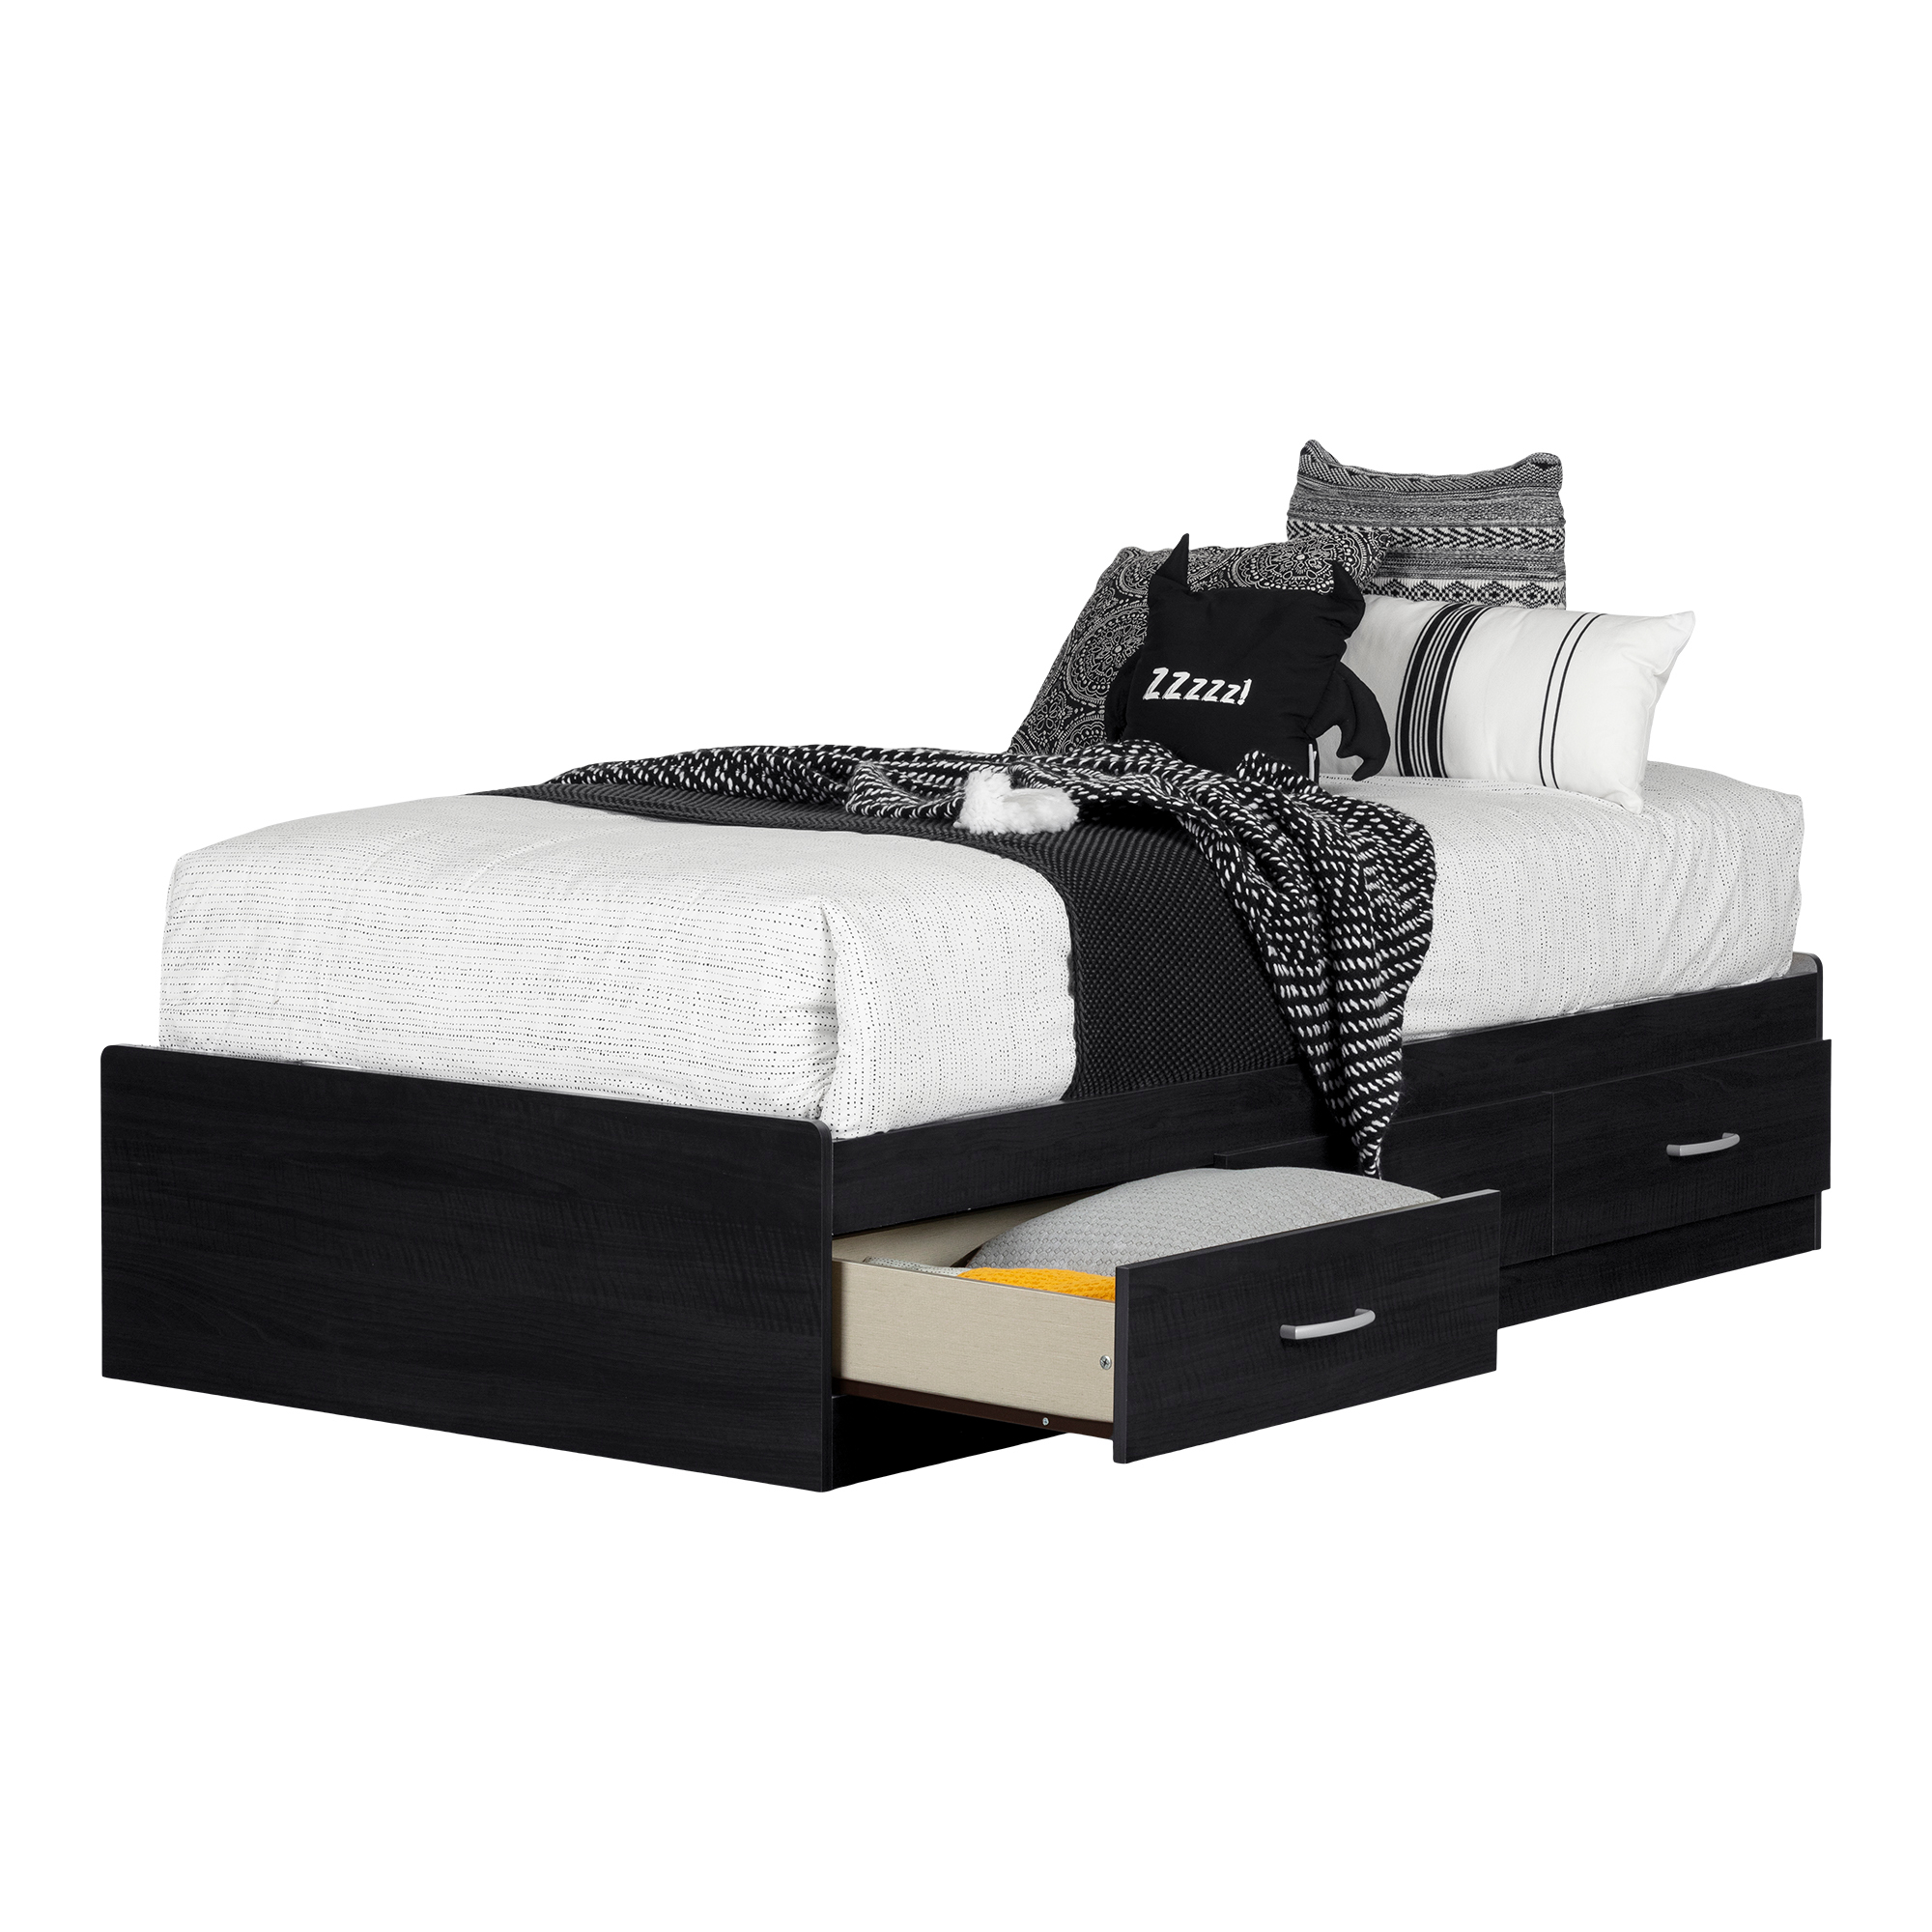 South Shore Cosmos 3-Drawer Storage Bed, Twin Black Onyx - image 3 of 9